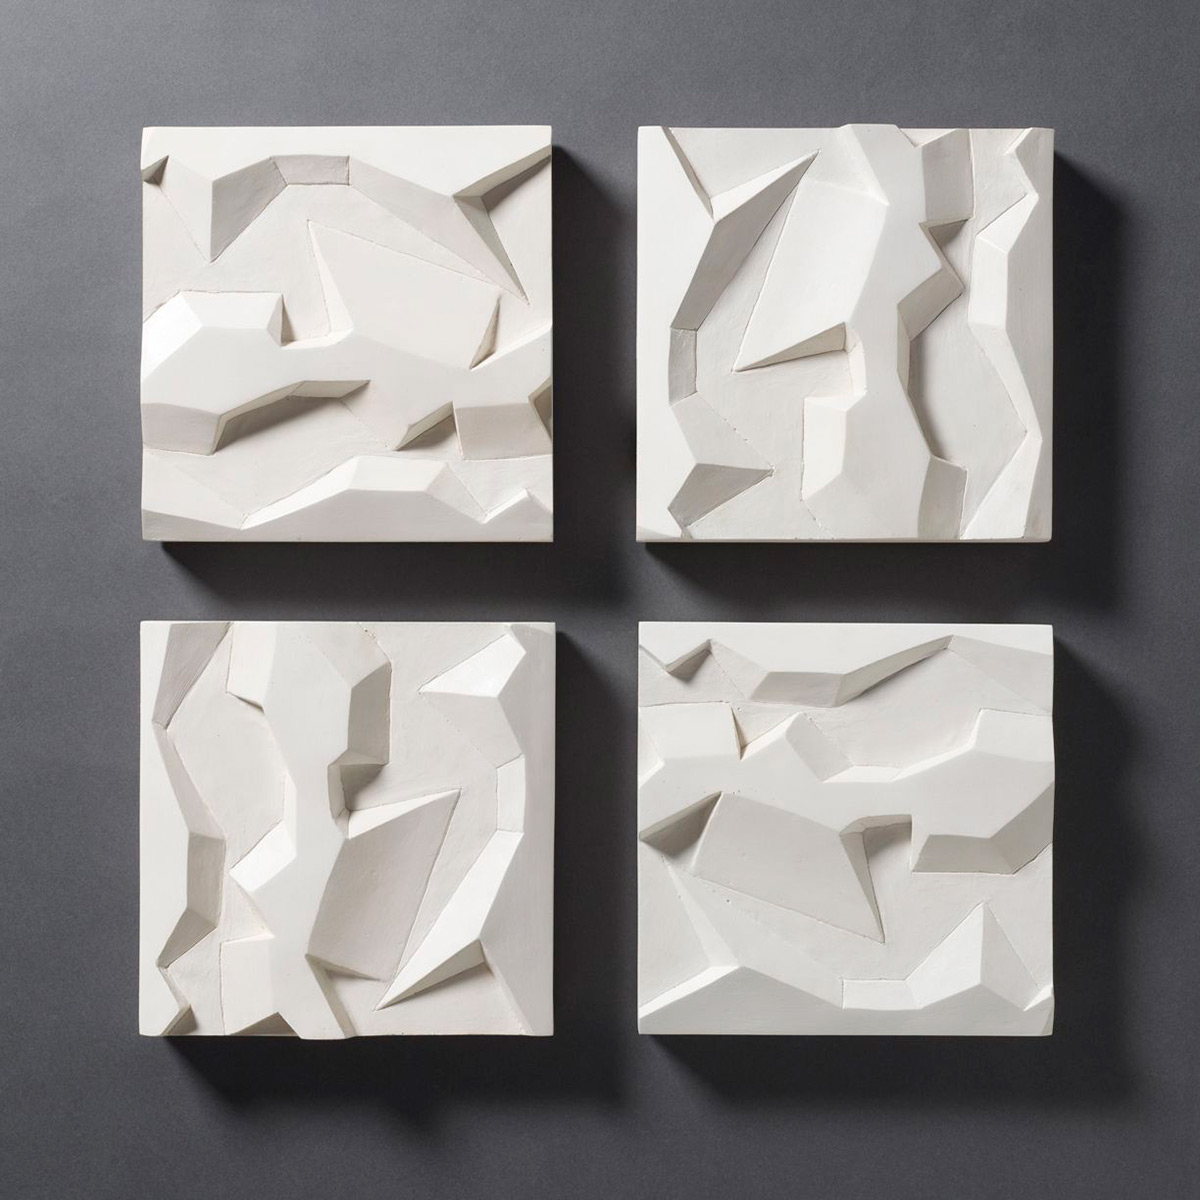  Untitled Wall Reliefs – 2014 – 22 x 22 – Cast Hydrocal -  inquire  